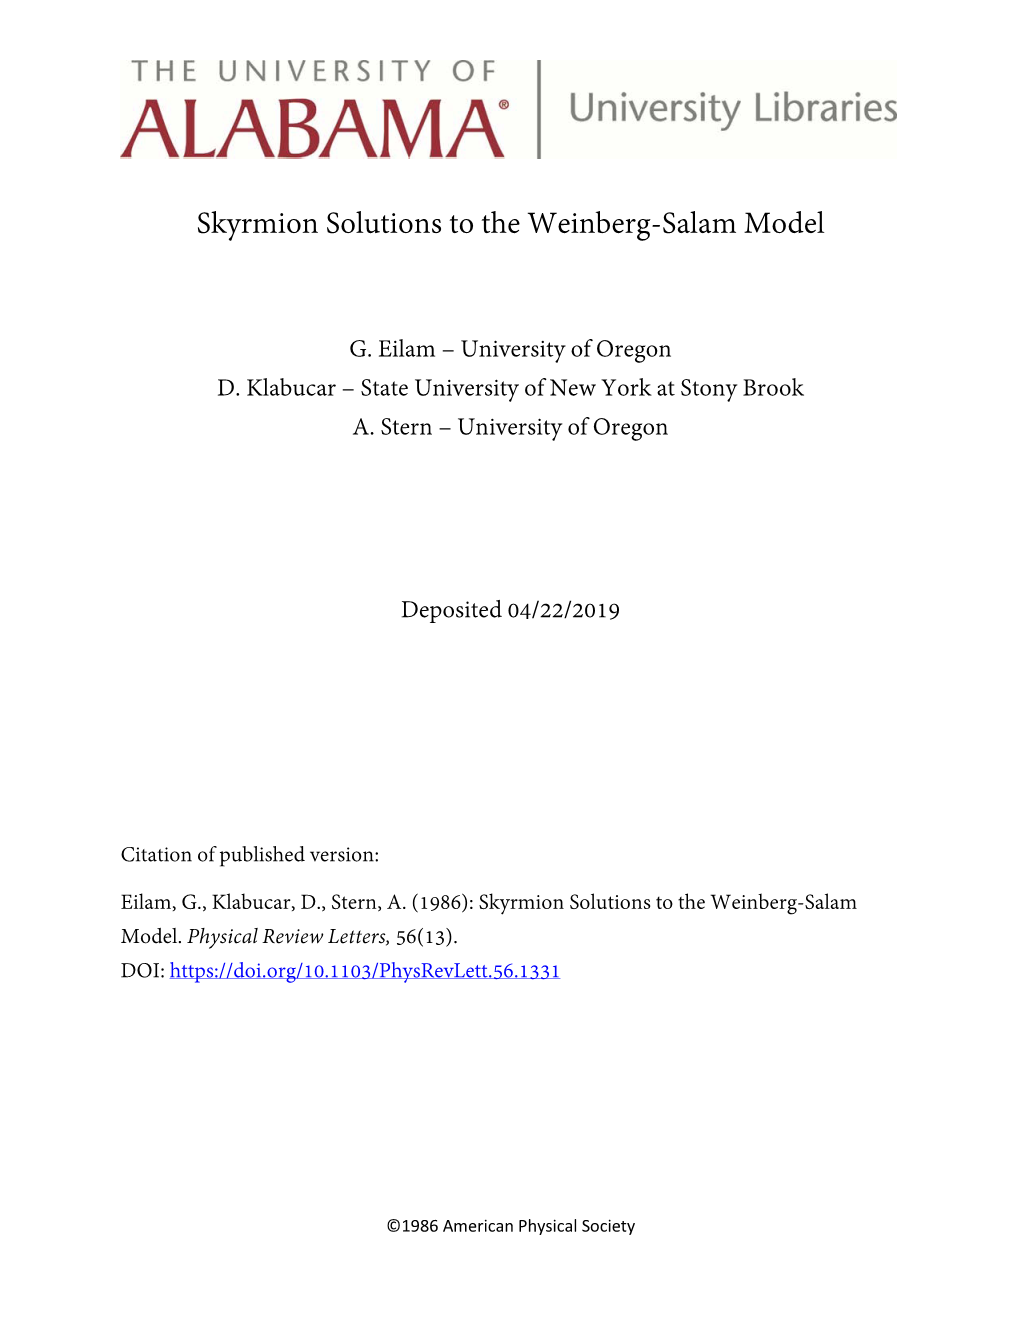 Skyrmion Solutions to the Weinberg-Salam Model